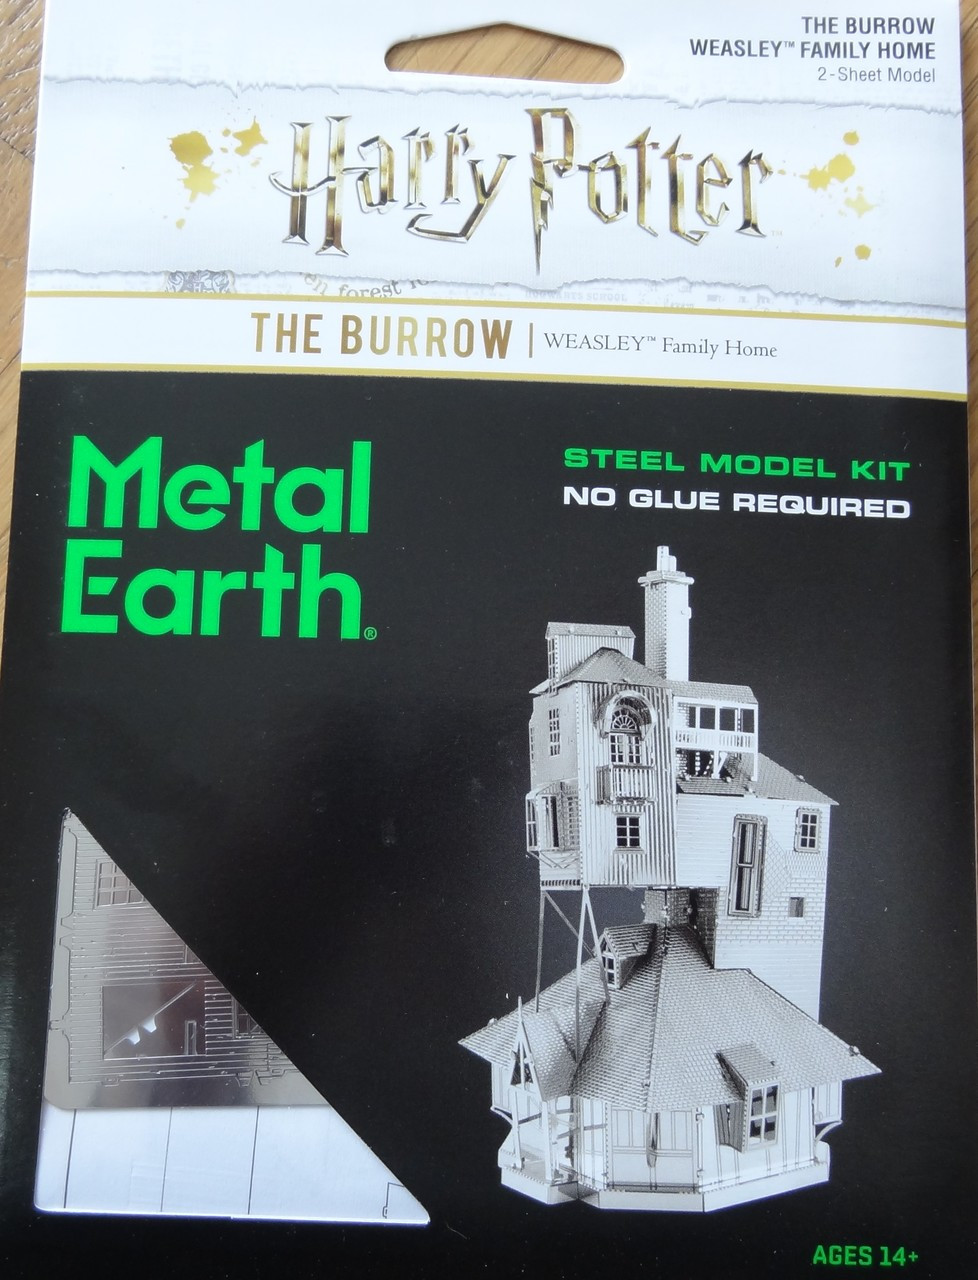 PHOTOS: New Harry Potter Metal Earth Model Kits Available at